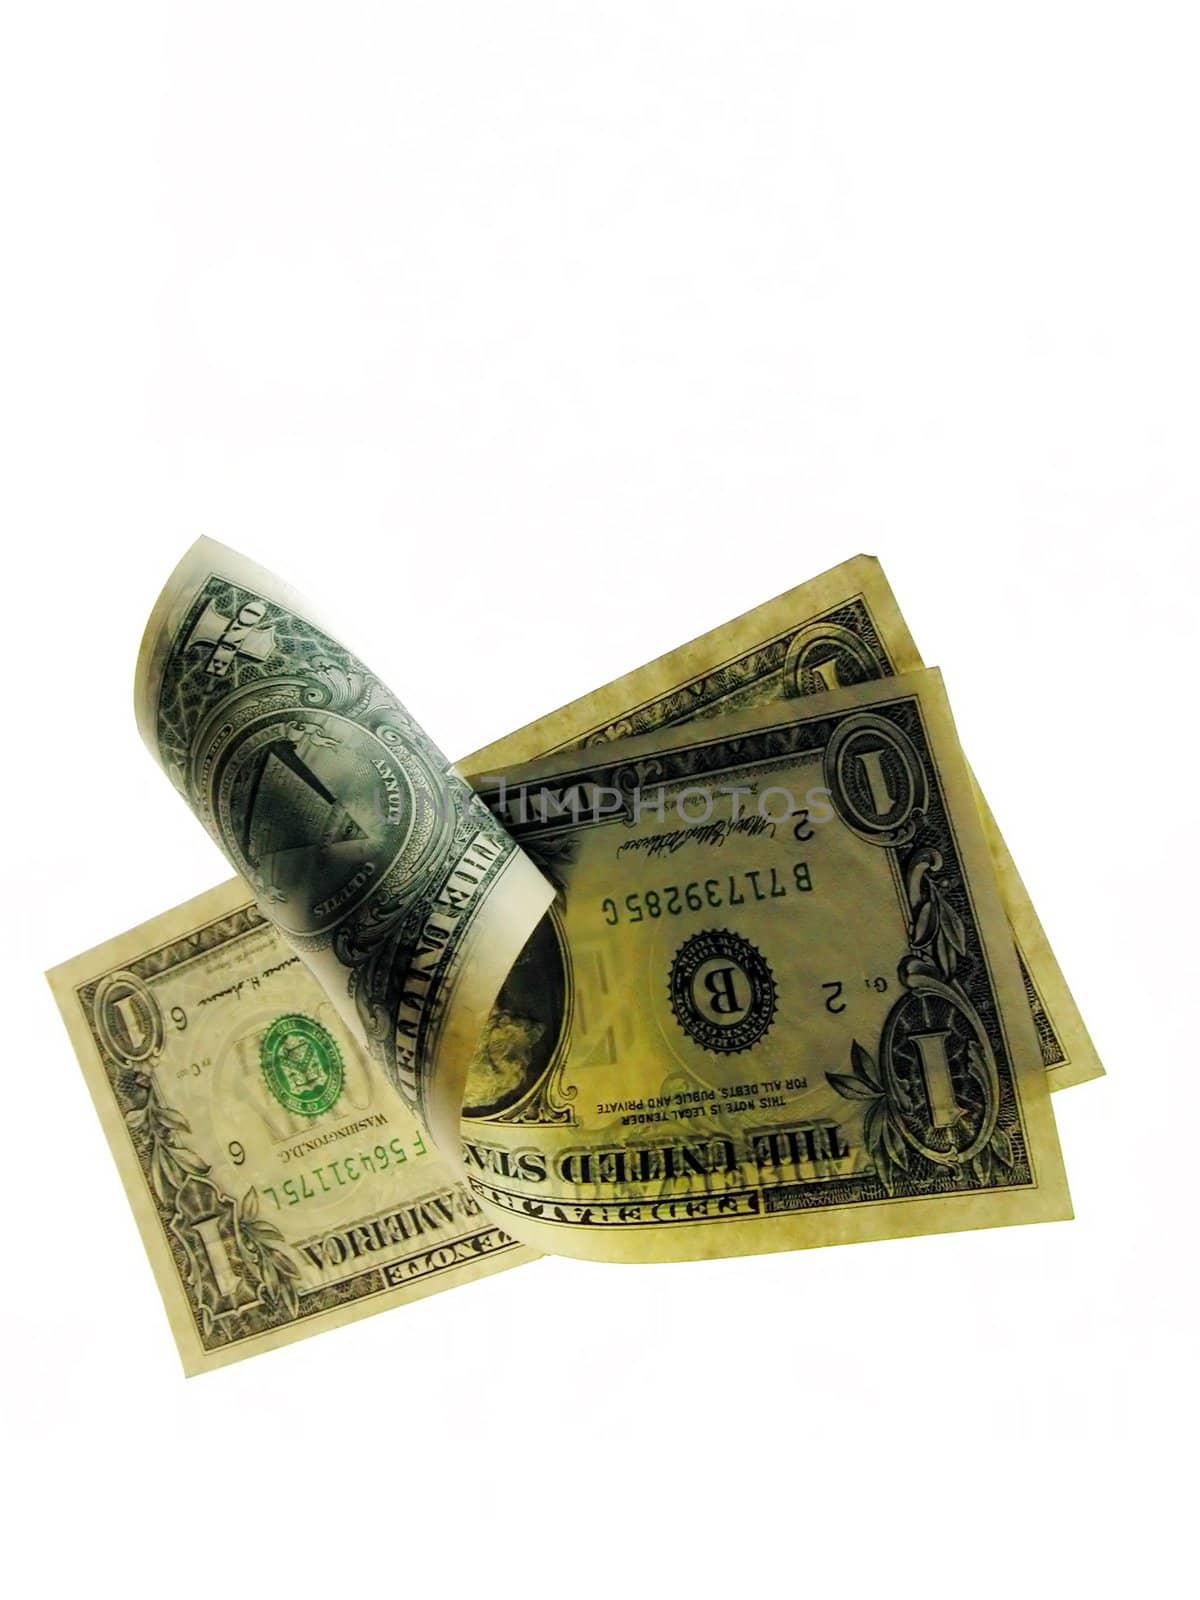 2 dollars bills in an interesting position,over white background          